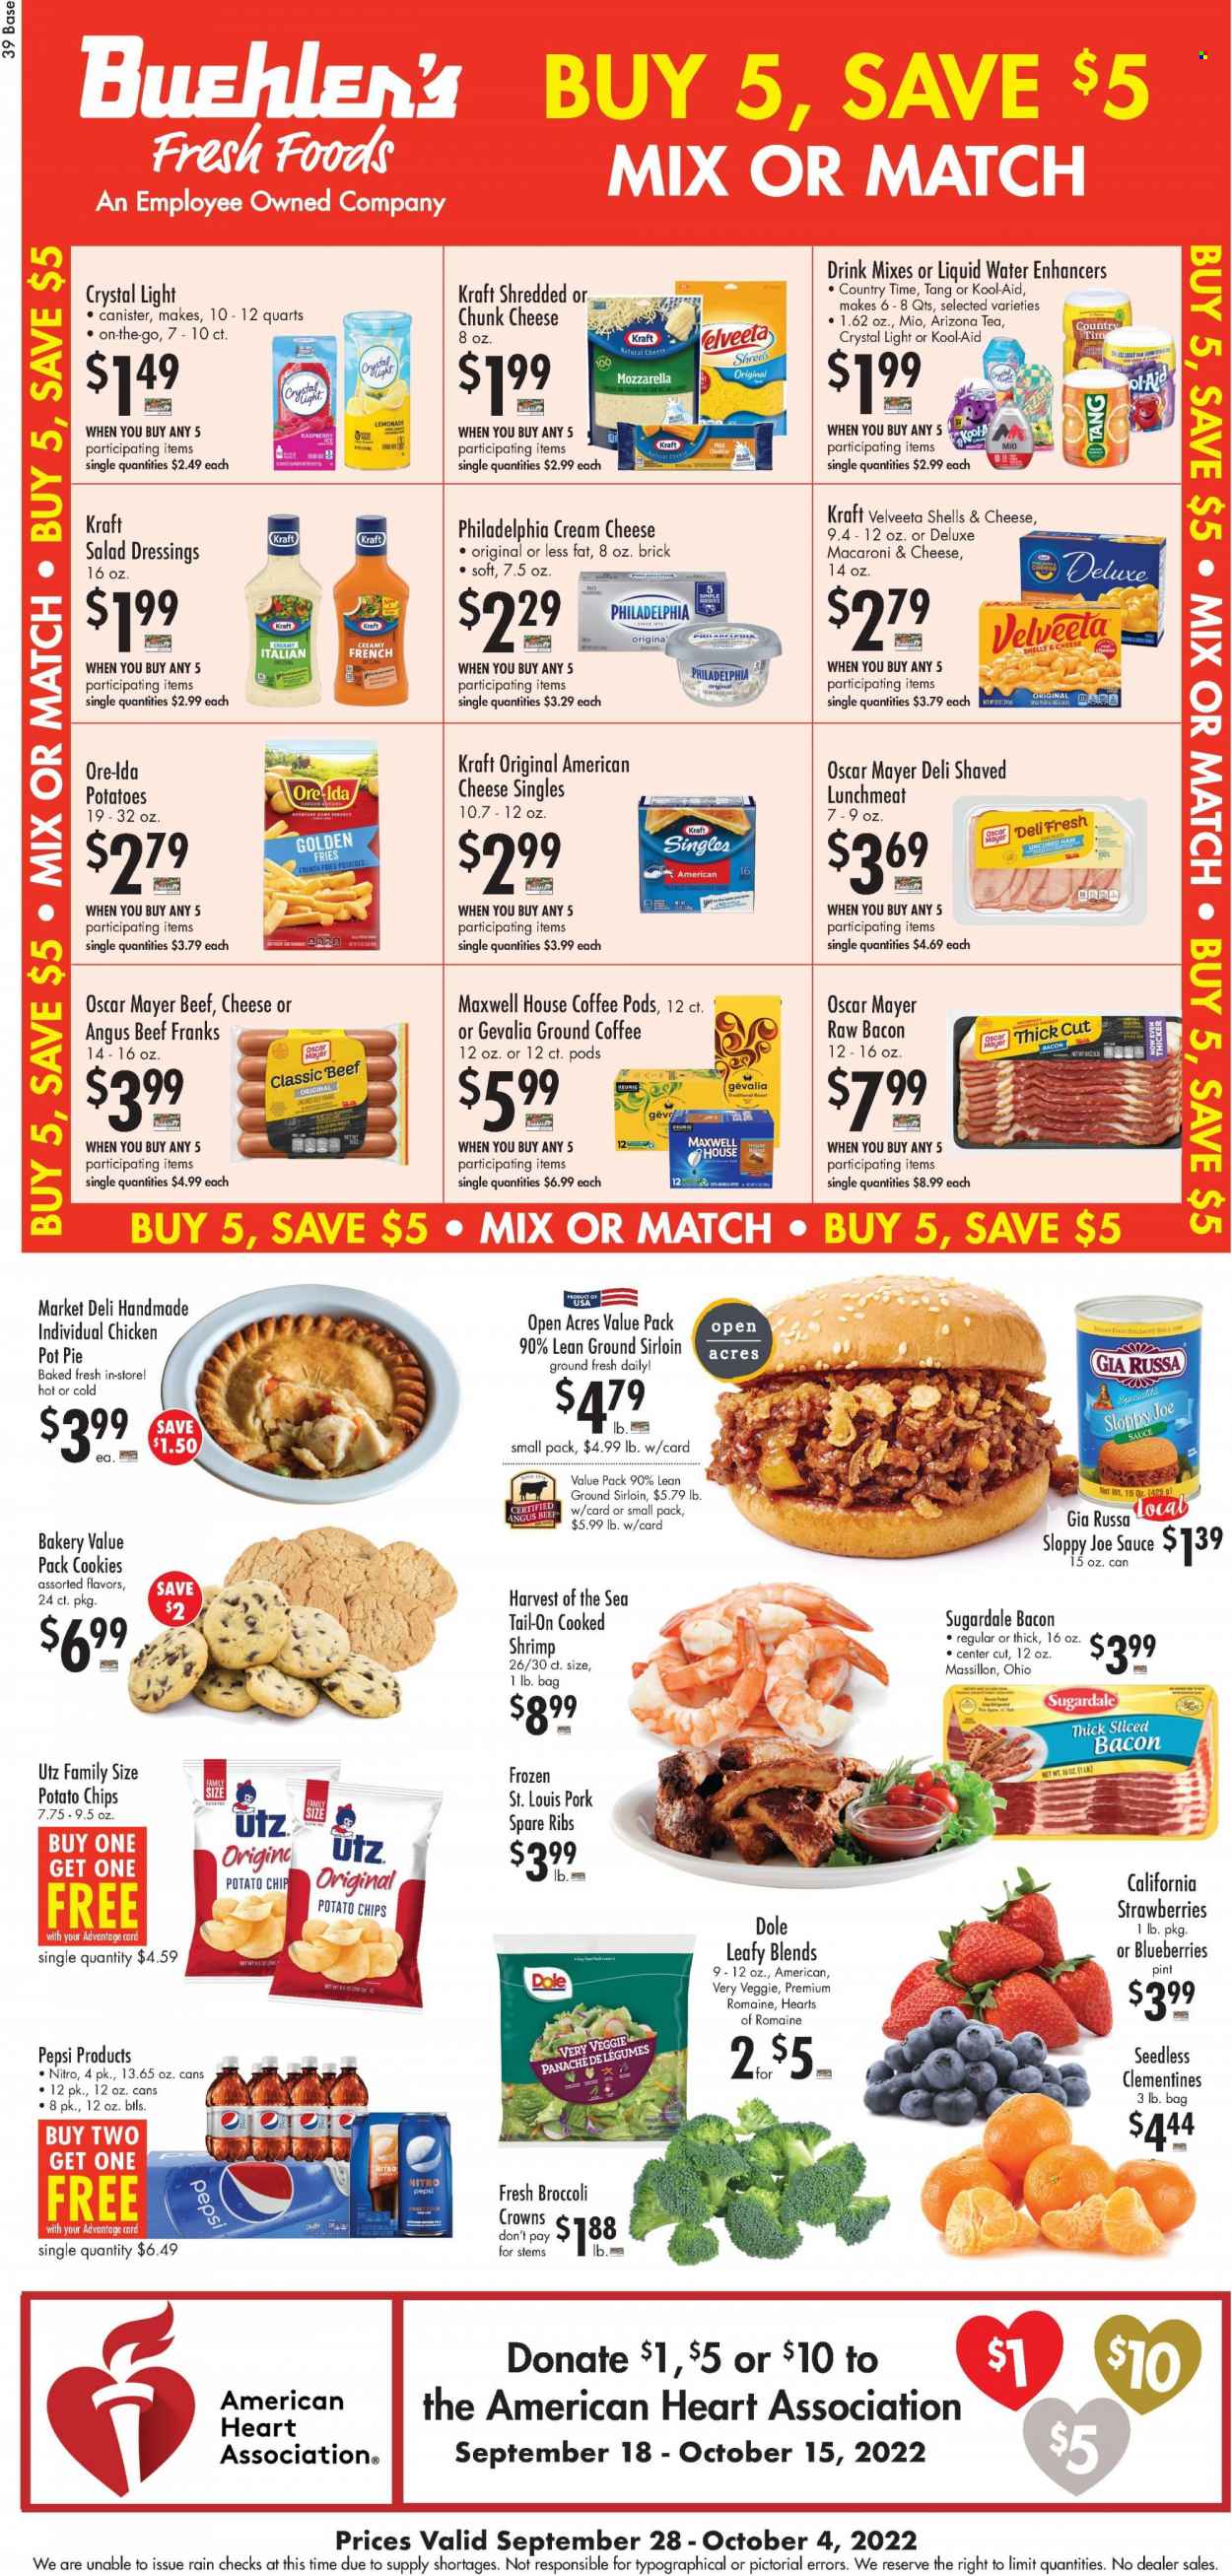 thumbnail - Buehler's Flyer - 09/28/2022 - 10/04/2022 - Sales products - pot pie, Dole, shrimps, pasta, Kraft®, Sugardale, bacon, Oscar Mayer, cheese spread, lunch meat, american cheese, cream cheese, mild cheddar, mozzarella, sandwich slices, Philadelphia, Kraft Singles, chunk cheese, potato fries, Ore-Ida, cookies, potato chips, salad dressing, lemonade, Pepsi, AriZona, Country Time, Maxwell House, tea, coffee pods, ground coffee, Gevalia, Keurig, beef meat, pork meat, pork ribs, pork spare ribs, pot, canister, clementines. Page 1.